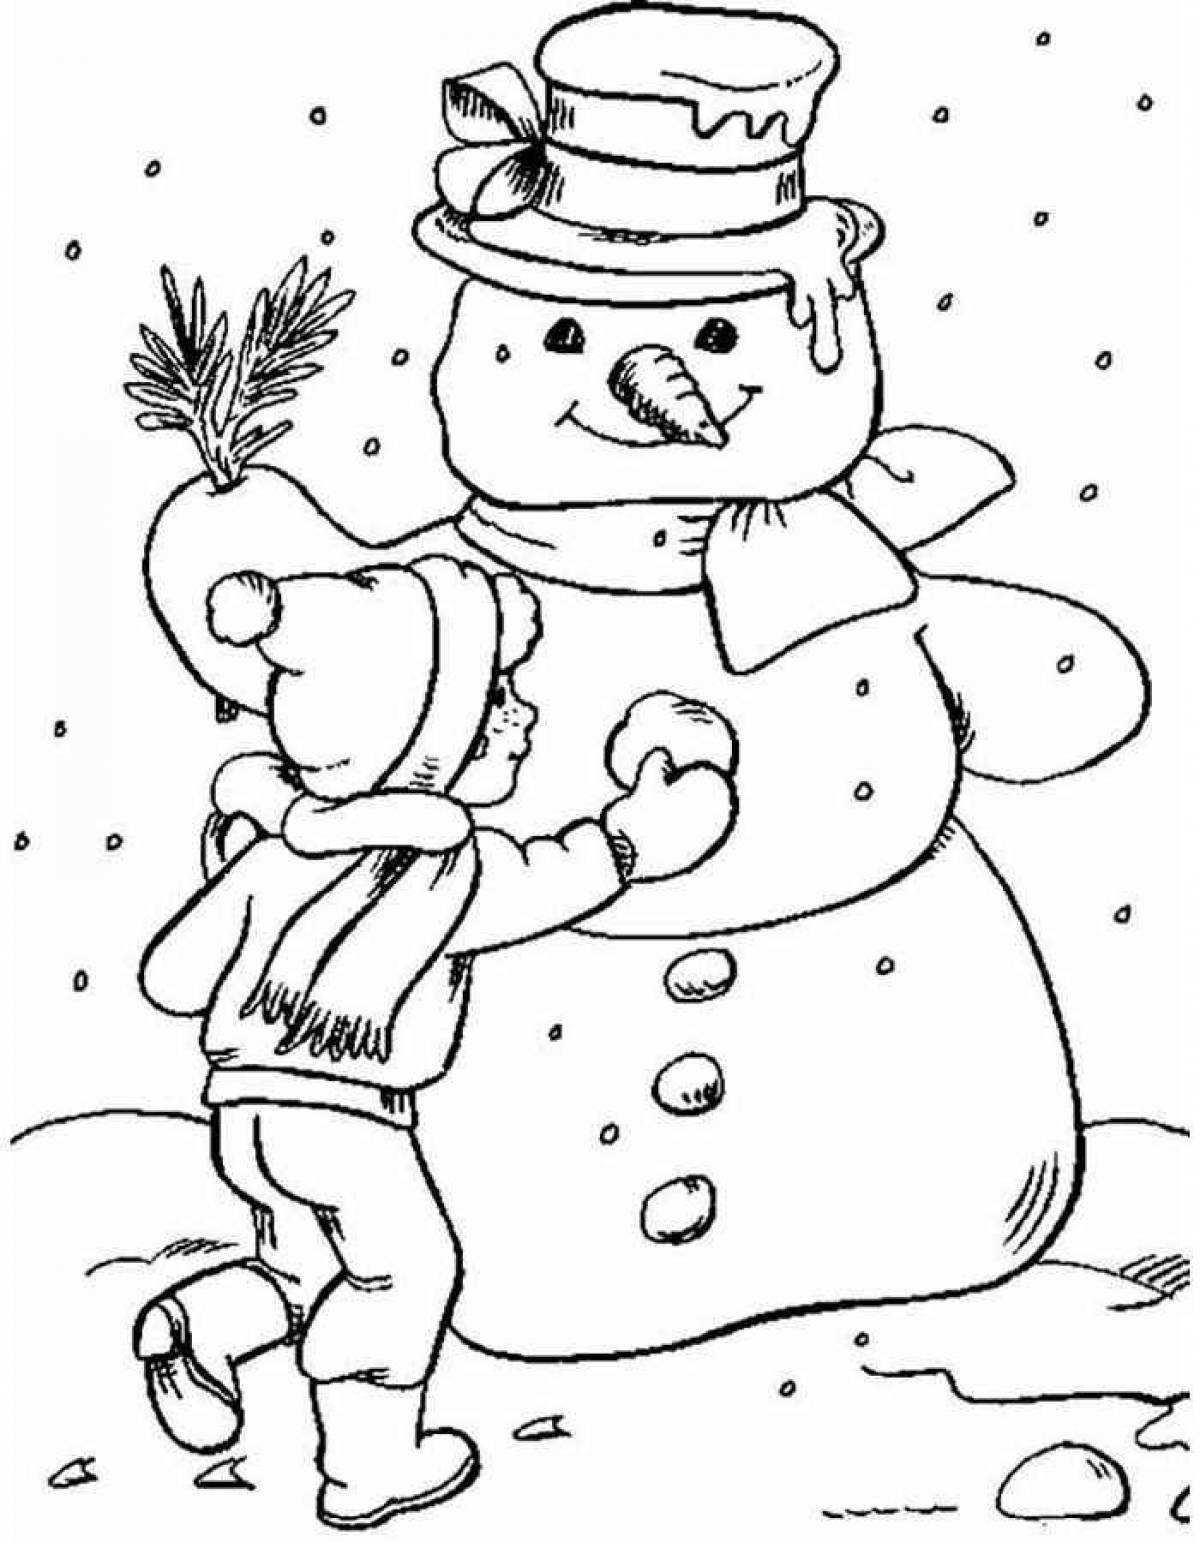 Playful snowman coloring book for kids